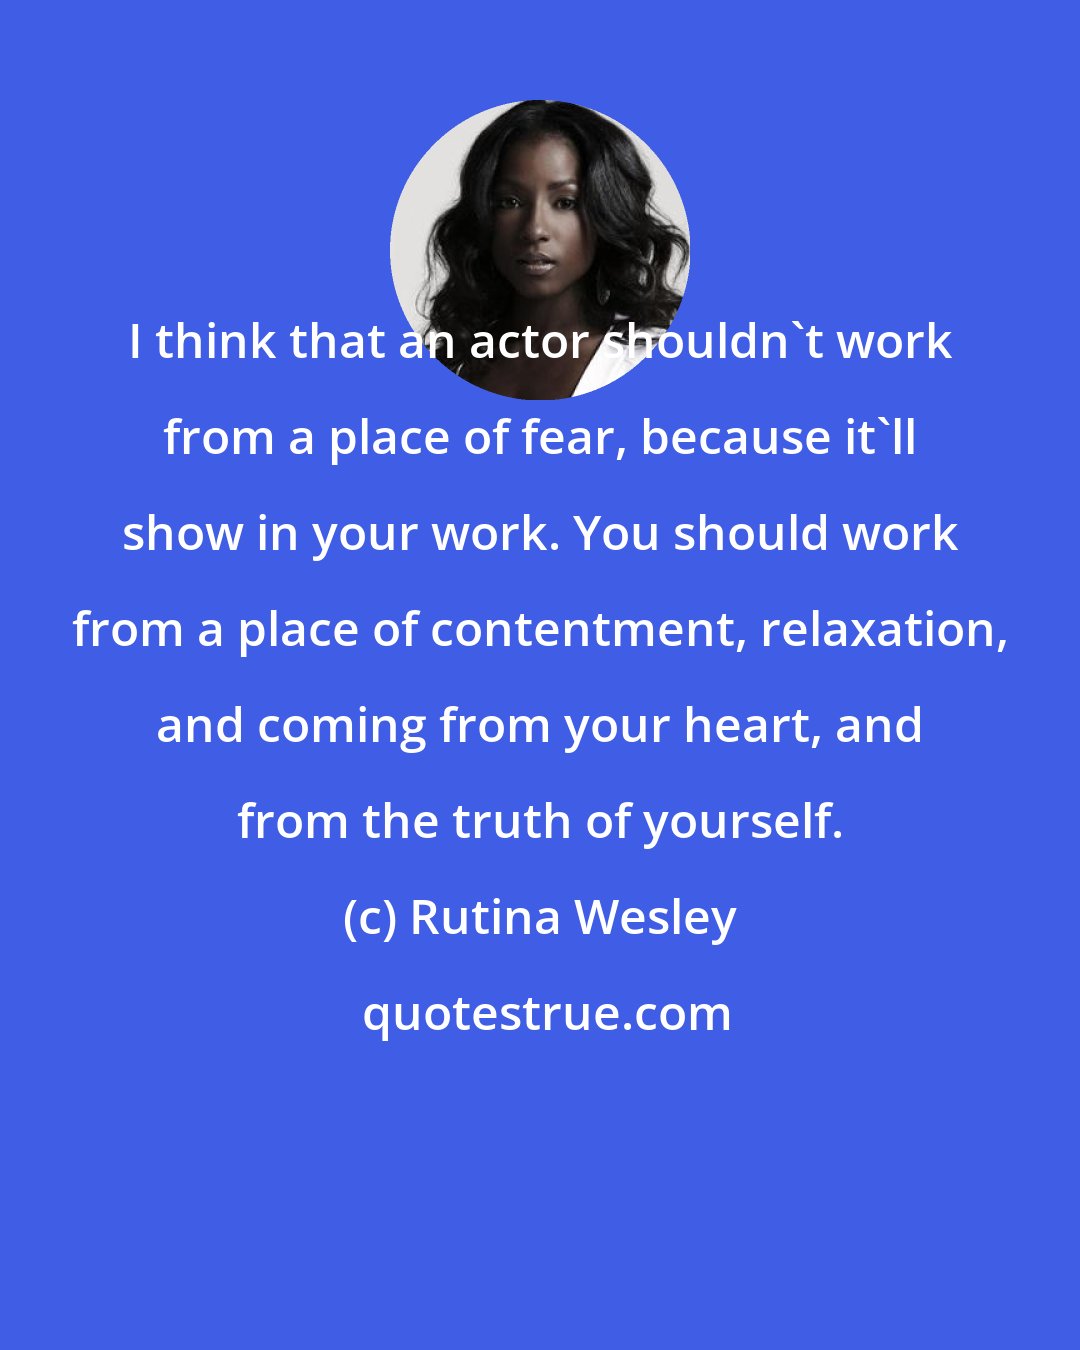 Rutina Wesley: I think that an actor shouldn't work from a place of fear, because it'll show in your work. You should work from a place of contentment, relaxation, and coming from your heart, and from the truth of yourself.